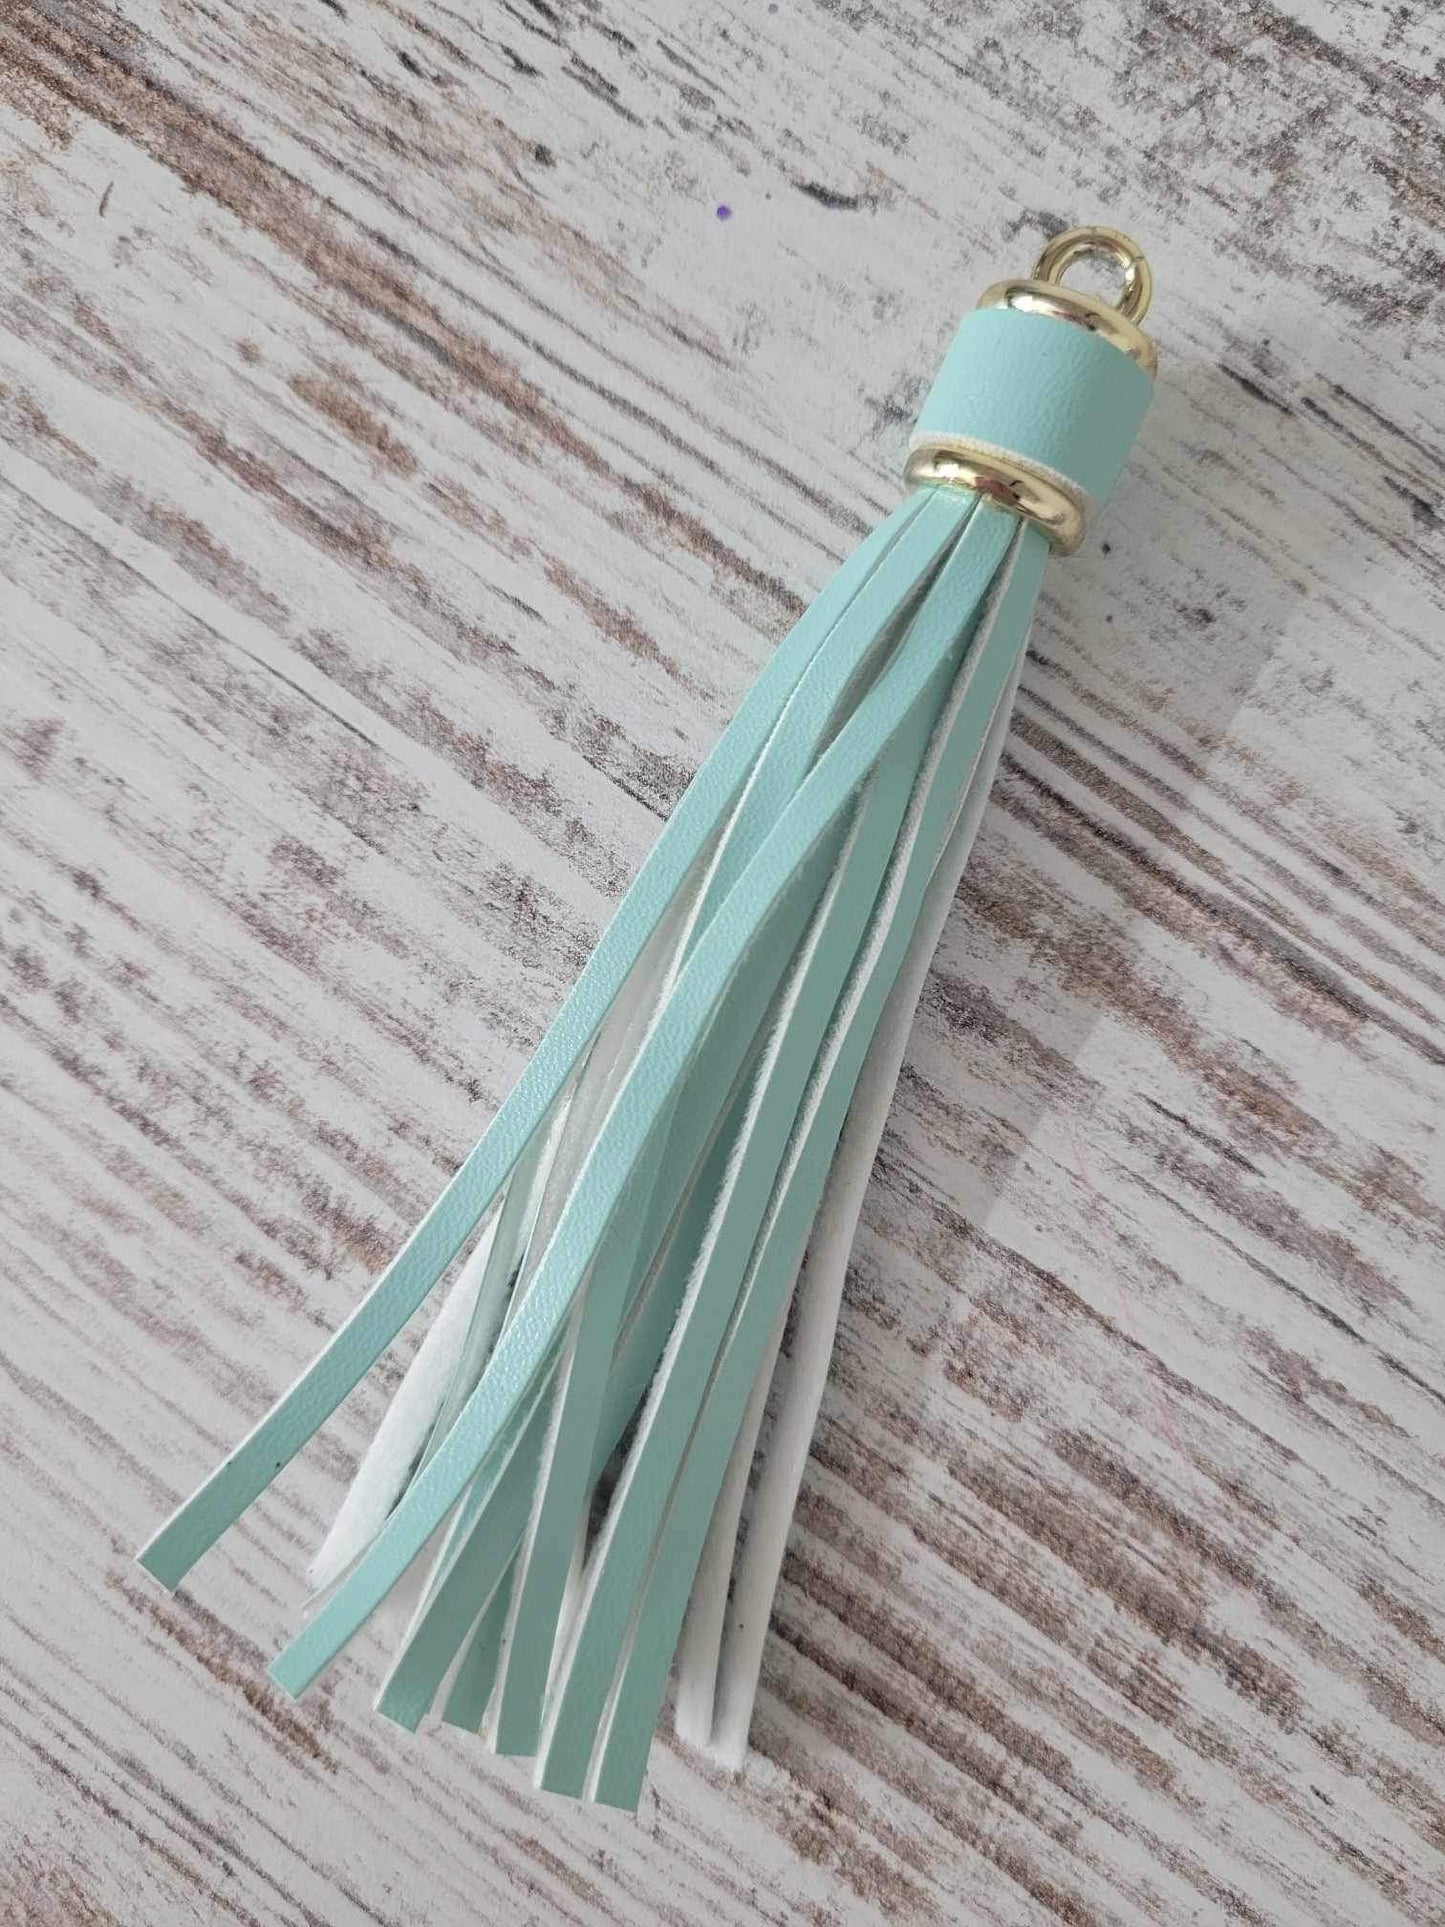 Keychain Tassels, Multiple Colors available, Backpacks, purses, Accessories.   Ships from the USA!